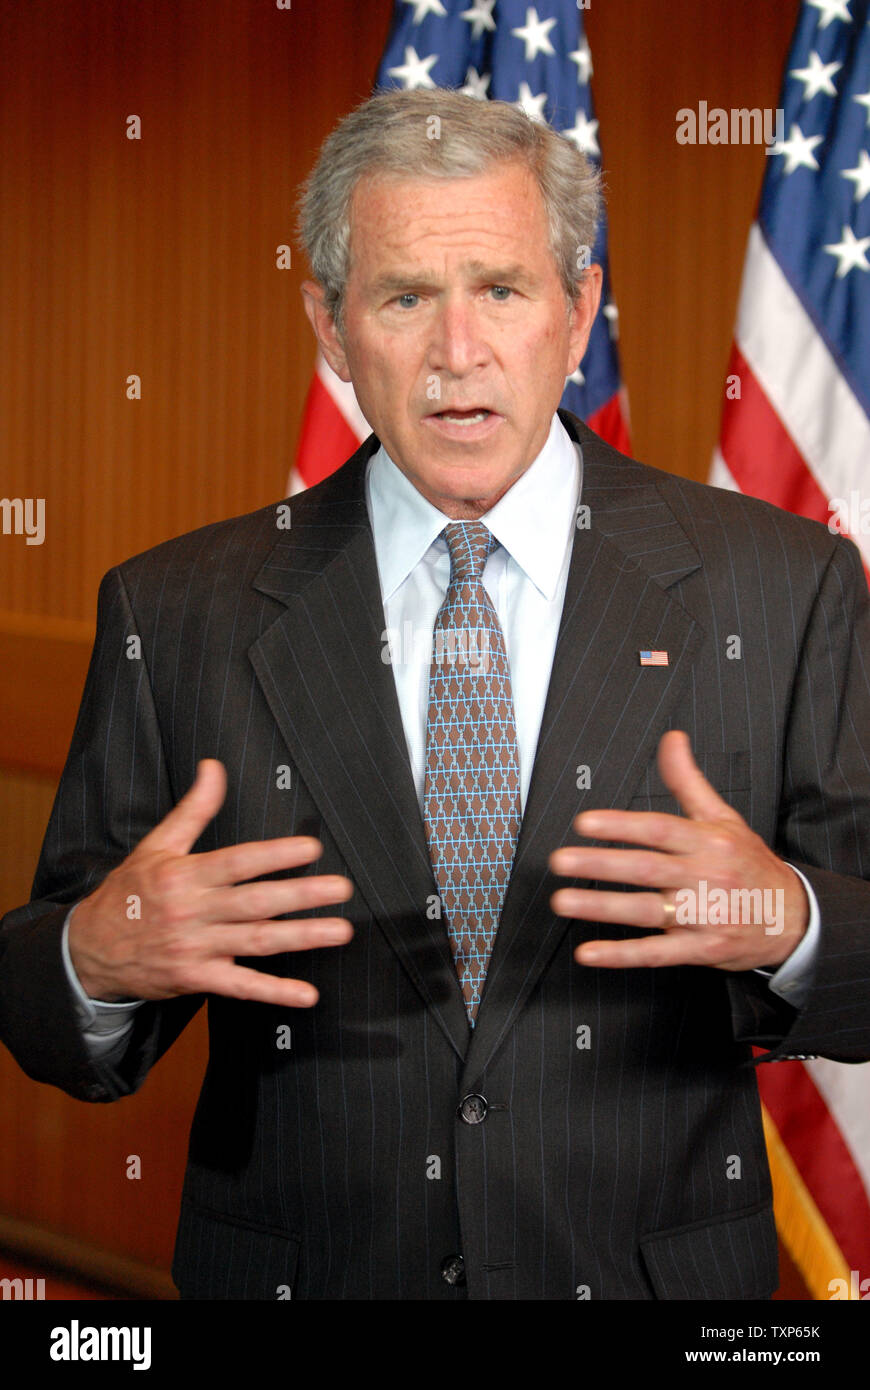 Washington, D.C. - July 3, 2007 -- United States President George W. Bush makes a statement after visiting wounded military personnel at Walter Reed Army Medical Center in Washington, D.C. on Tuesday, July 3, 2007.  He took 2 questions on the commutation of the jail sentence of Lewis I. 'Scooter' Libby. Credit: Ron Sachs / CNP Stock Photo